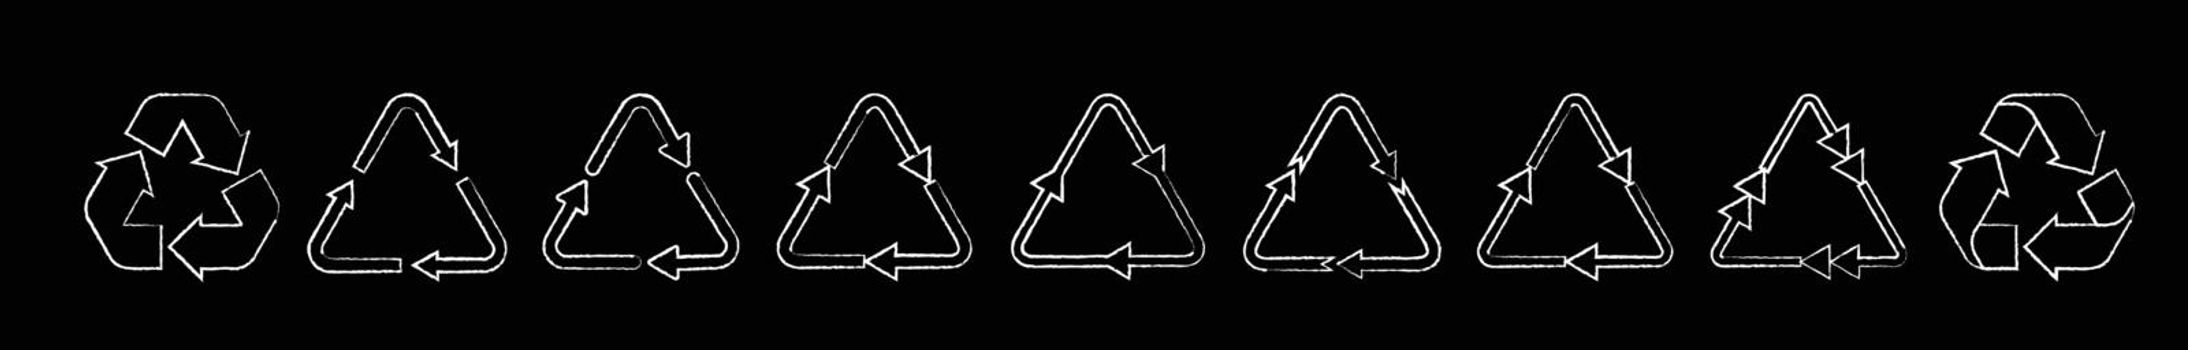 Chalked recycle triangle arrow symbols vector set